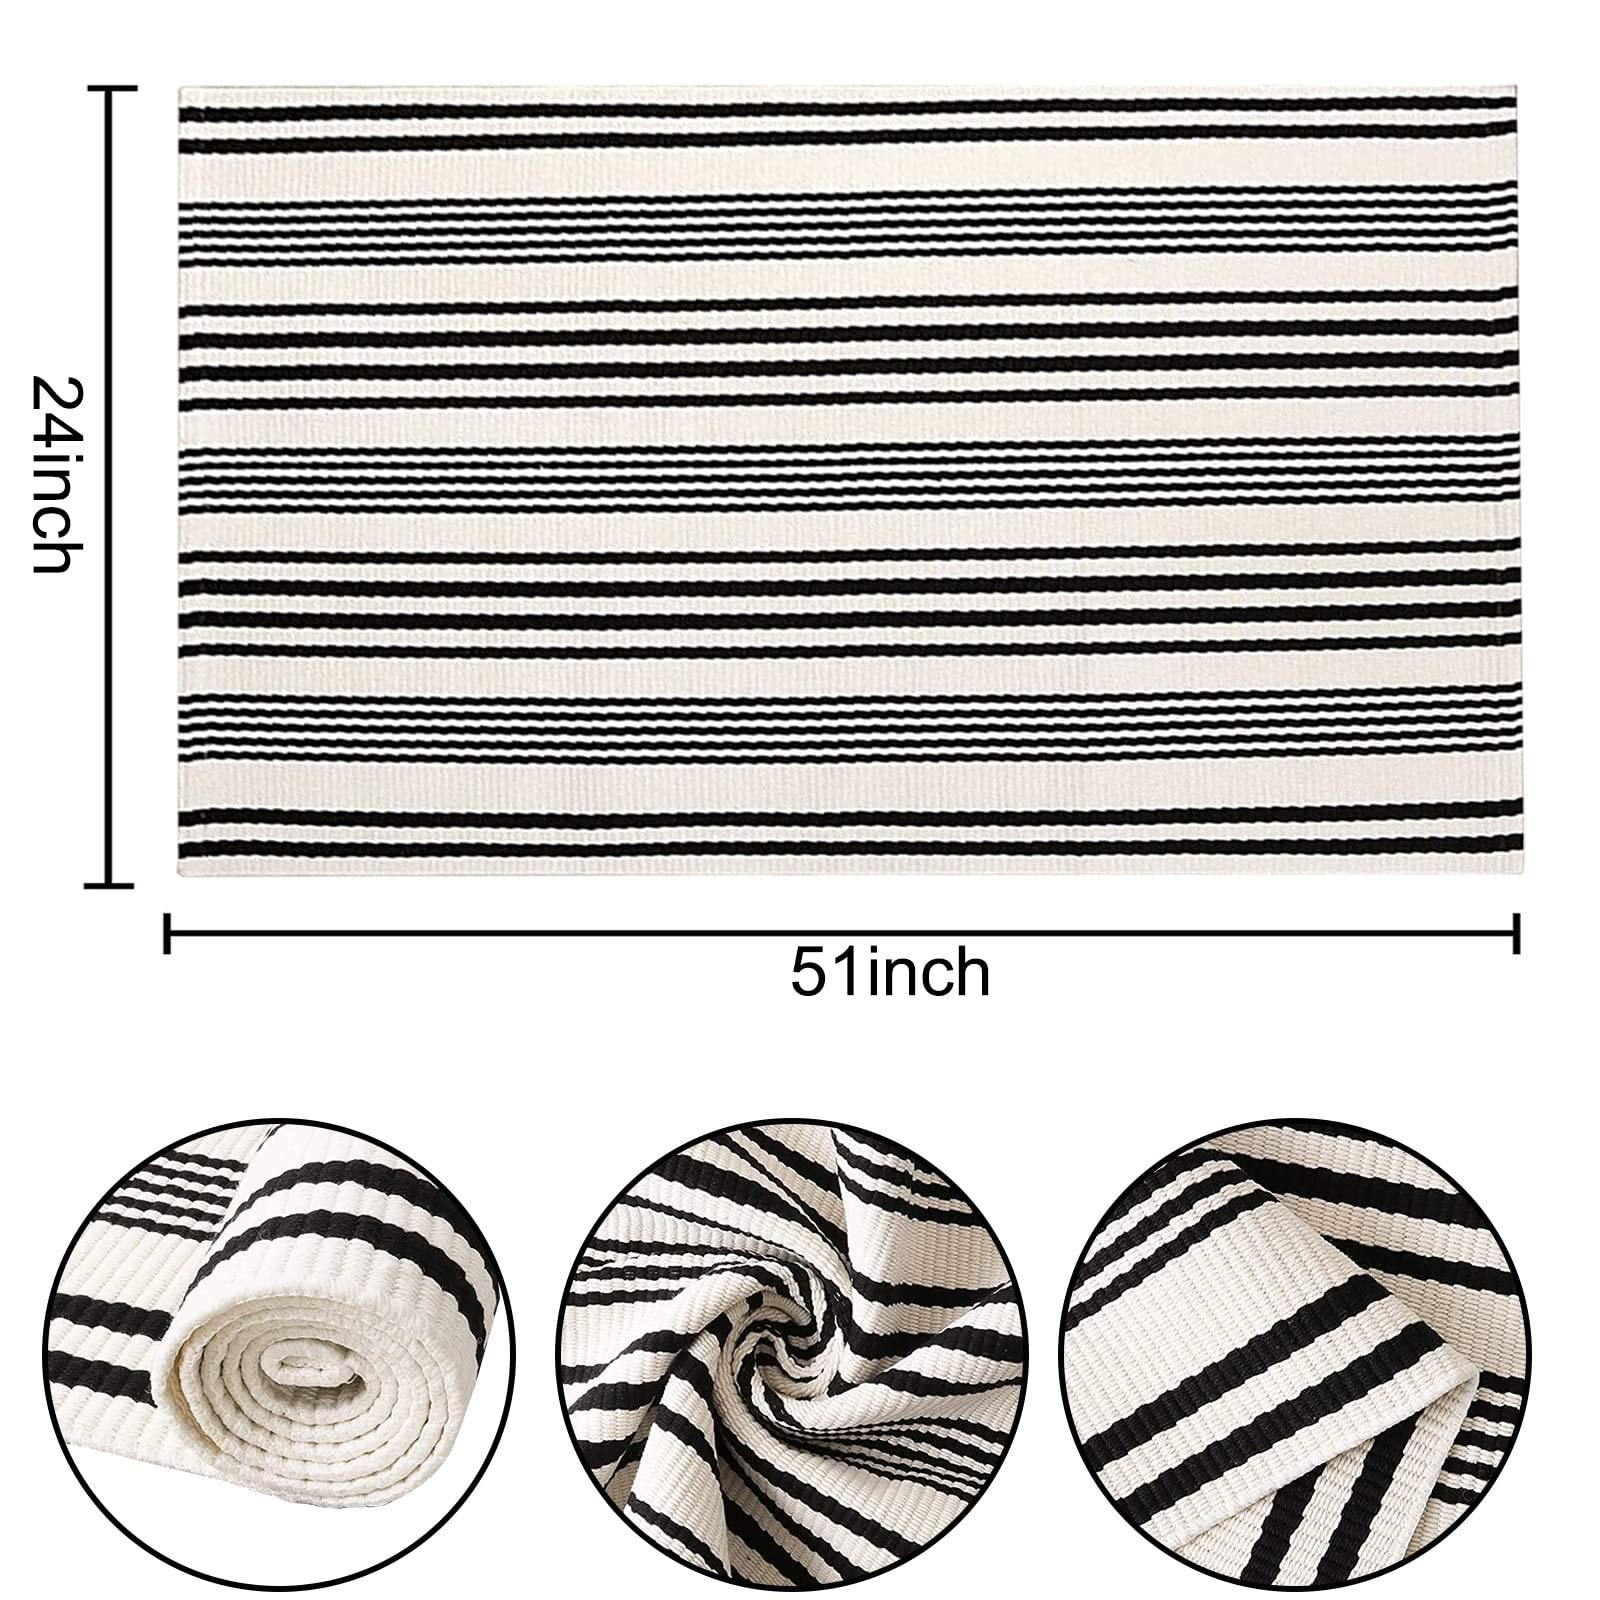 Black and White Striped Rug 24'' x 51''Outdoor Front Porch Rug Hand-Woven Machine Washable Indoor/Outdoor Layered Door Mats for Entryway/Bedroom/Outdoor - CookCave